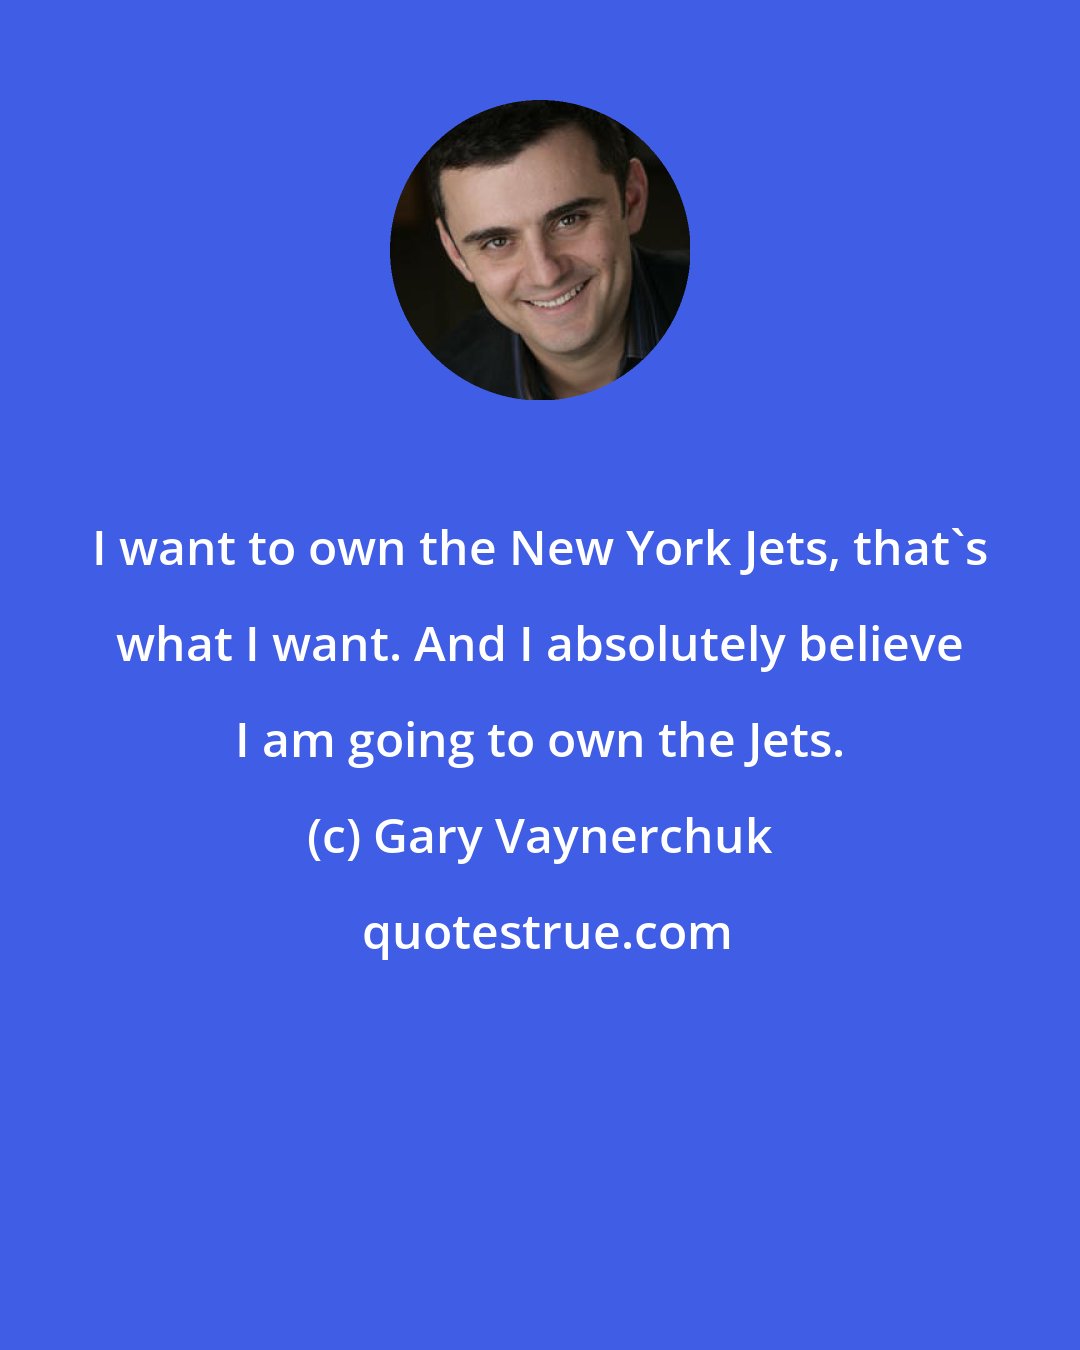 Gary Vaynerchuk: I want to own the New York Jets, that's what I want. And I absolutely believe I am going to own the Jets.